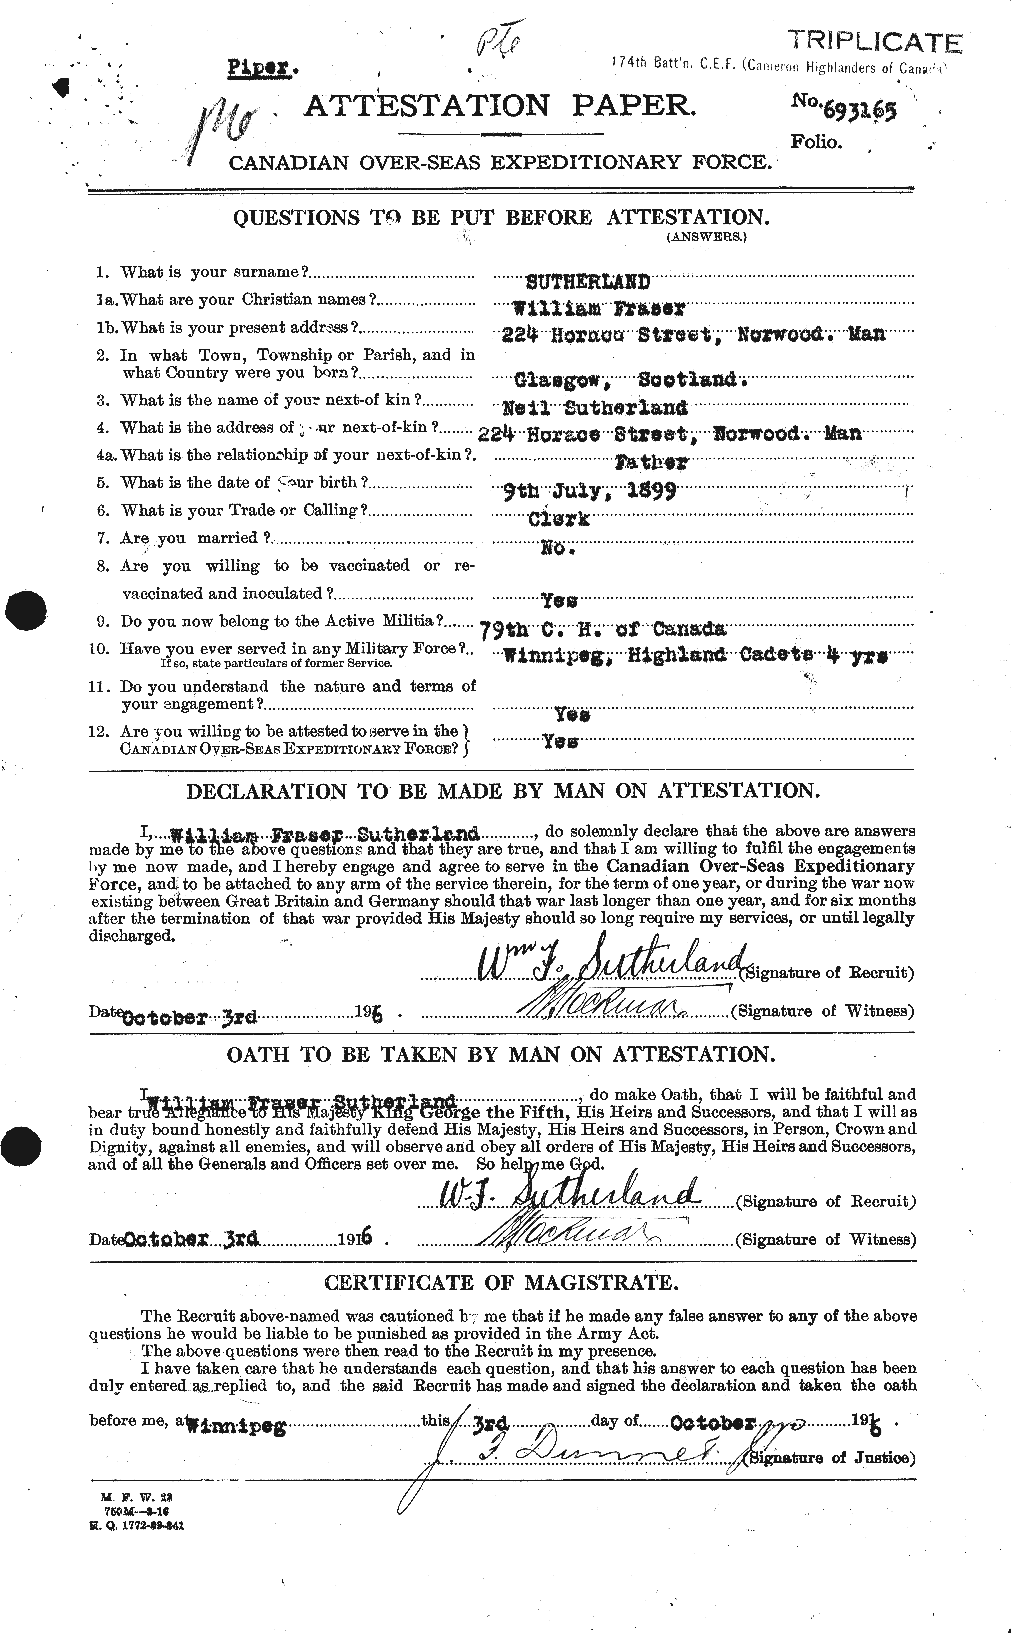 Personnel Records of the First World War - CEF 126432a